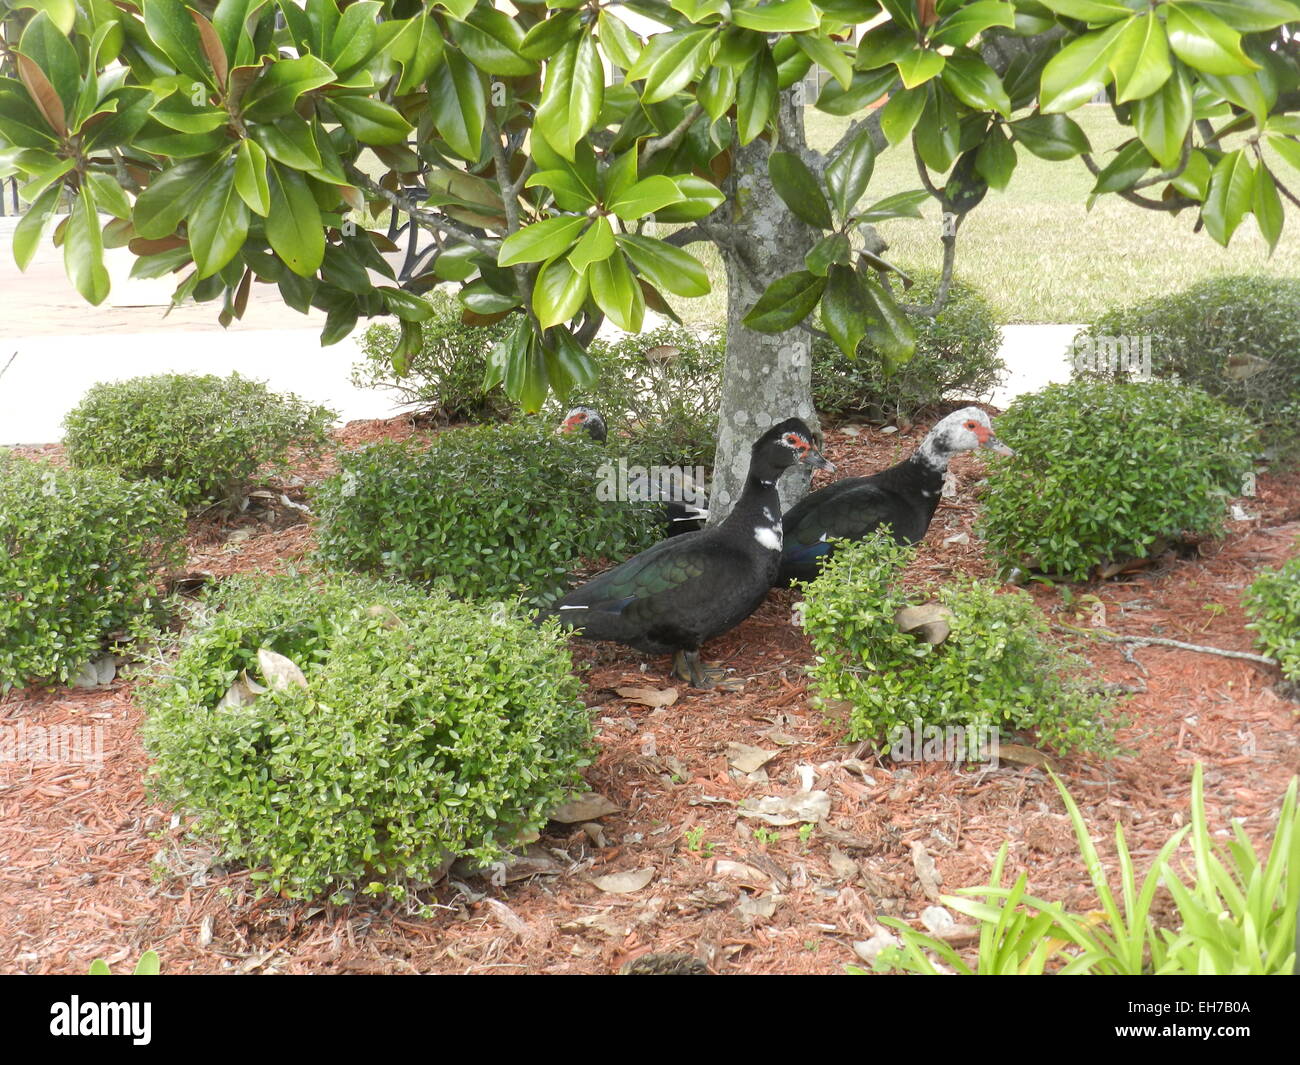 Gooses relaxing under tree at the park. Miami, Florida, USA. Photo taken on: March 3rd, 2015 Stock Photo